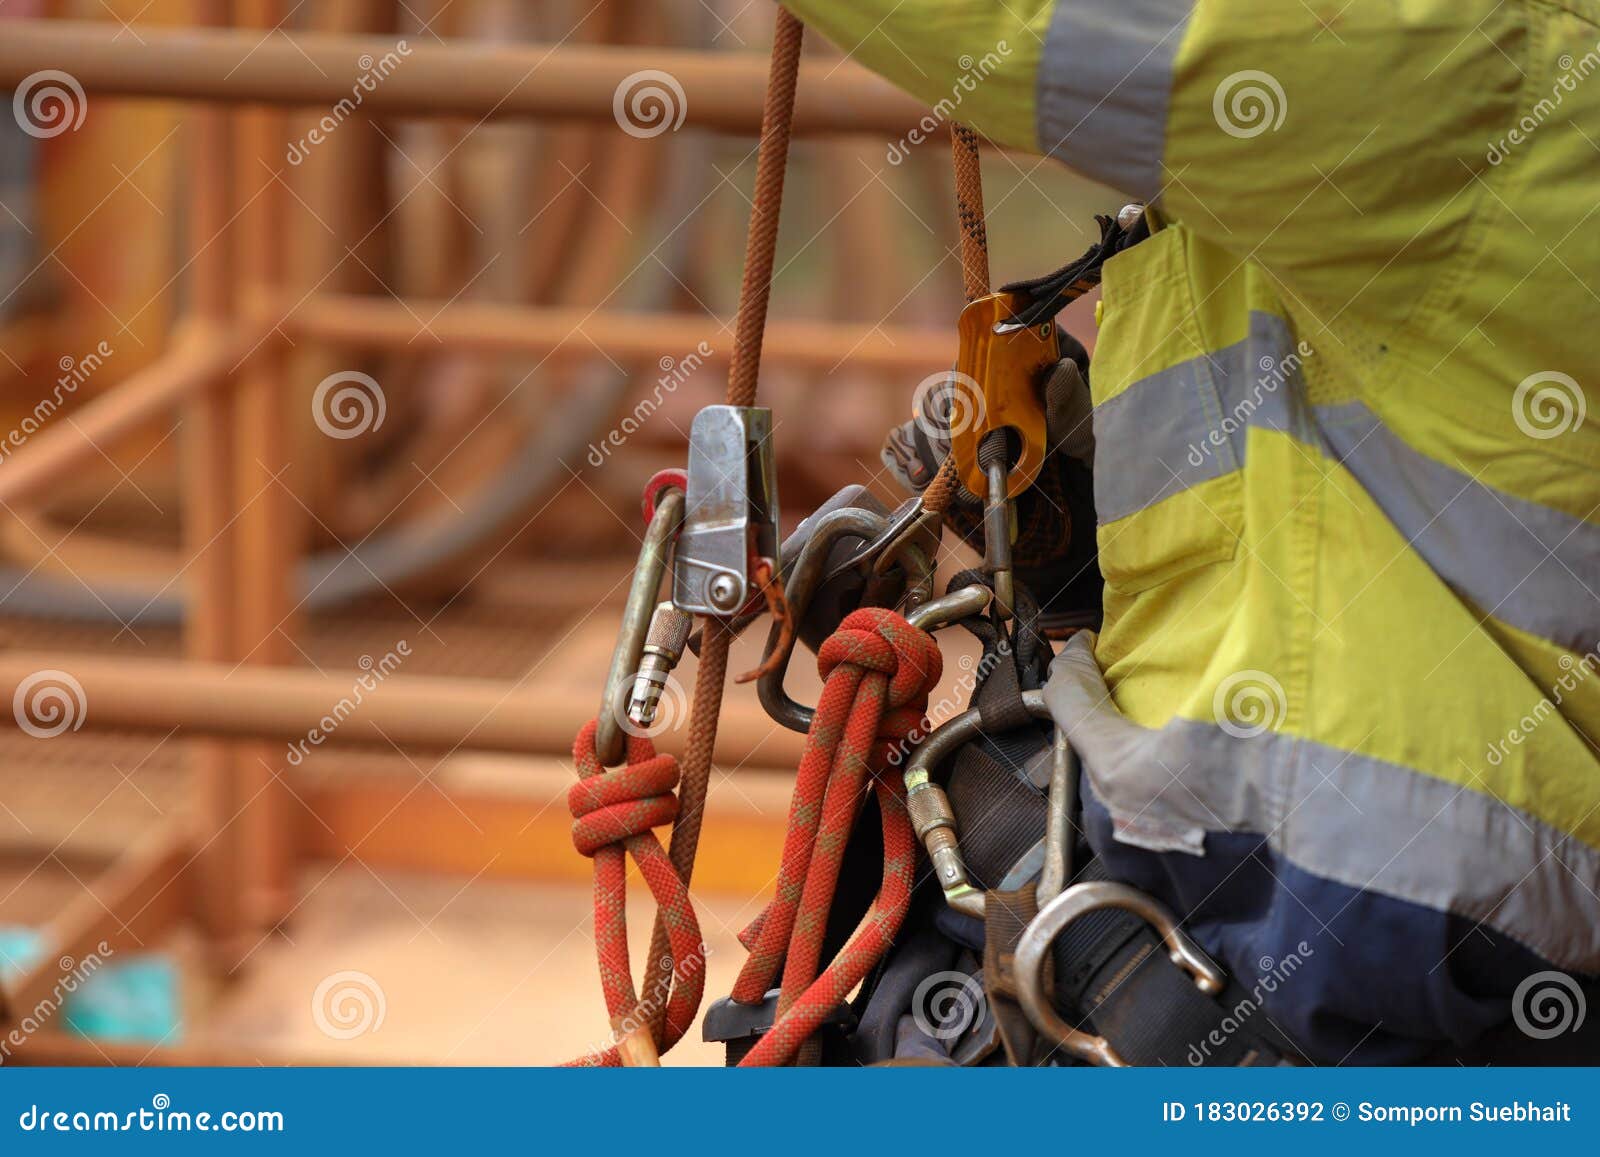 industry abseiler worker working at height abseiling removing rope from chest harness croll safety device